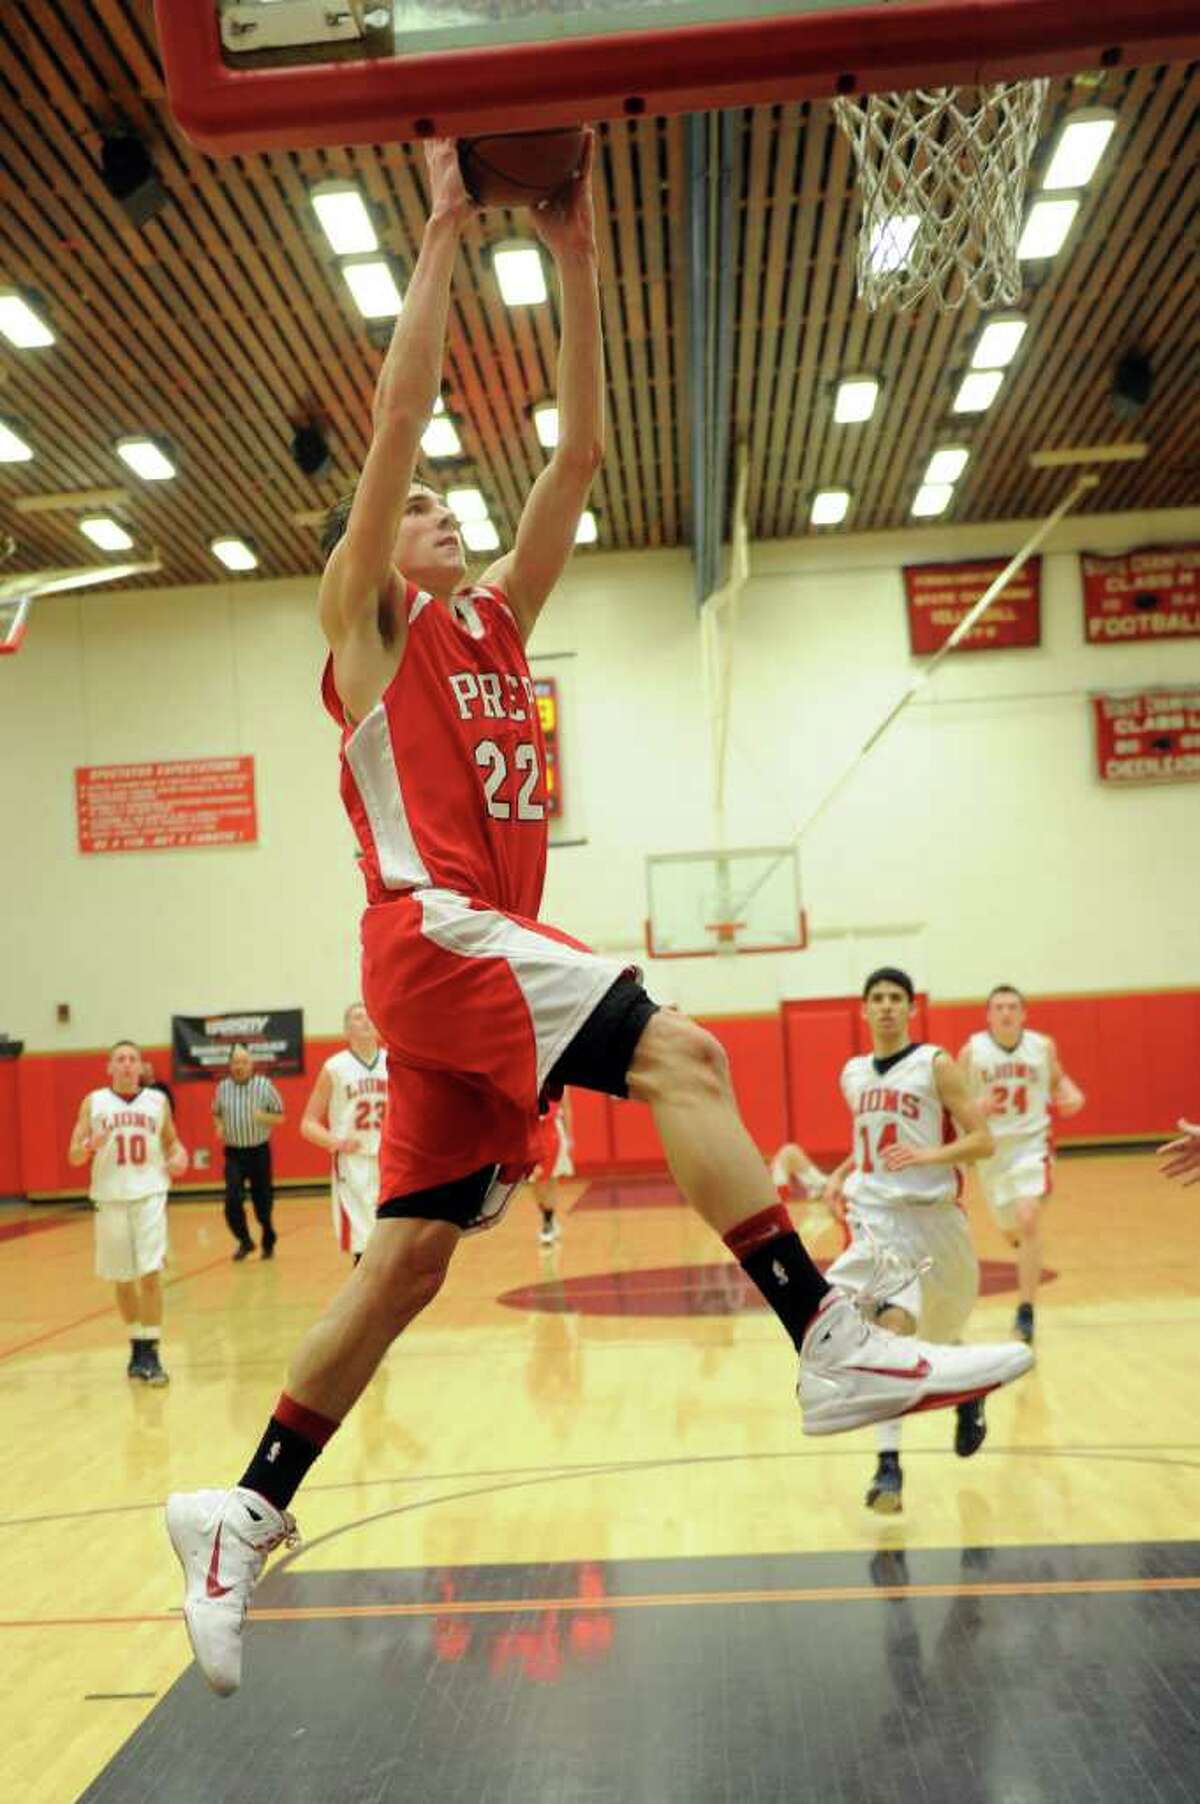 Fairfield Prep's Terry Tarpey takes a shot during Tuesday's game at Foran High School in Milford on February 15, 2011.